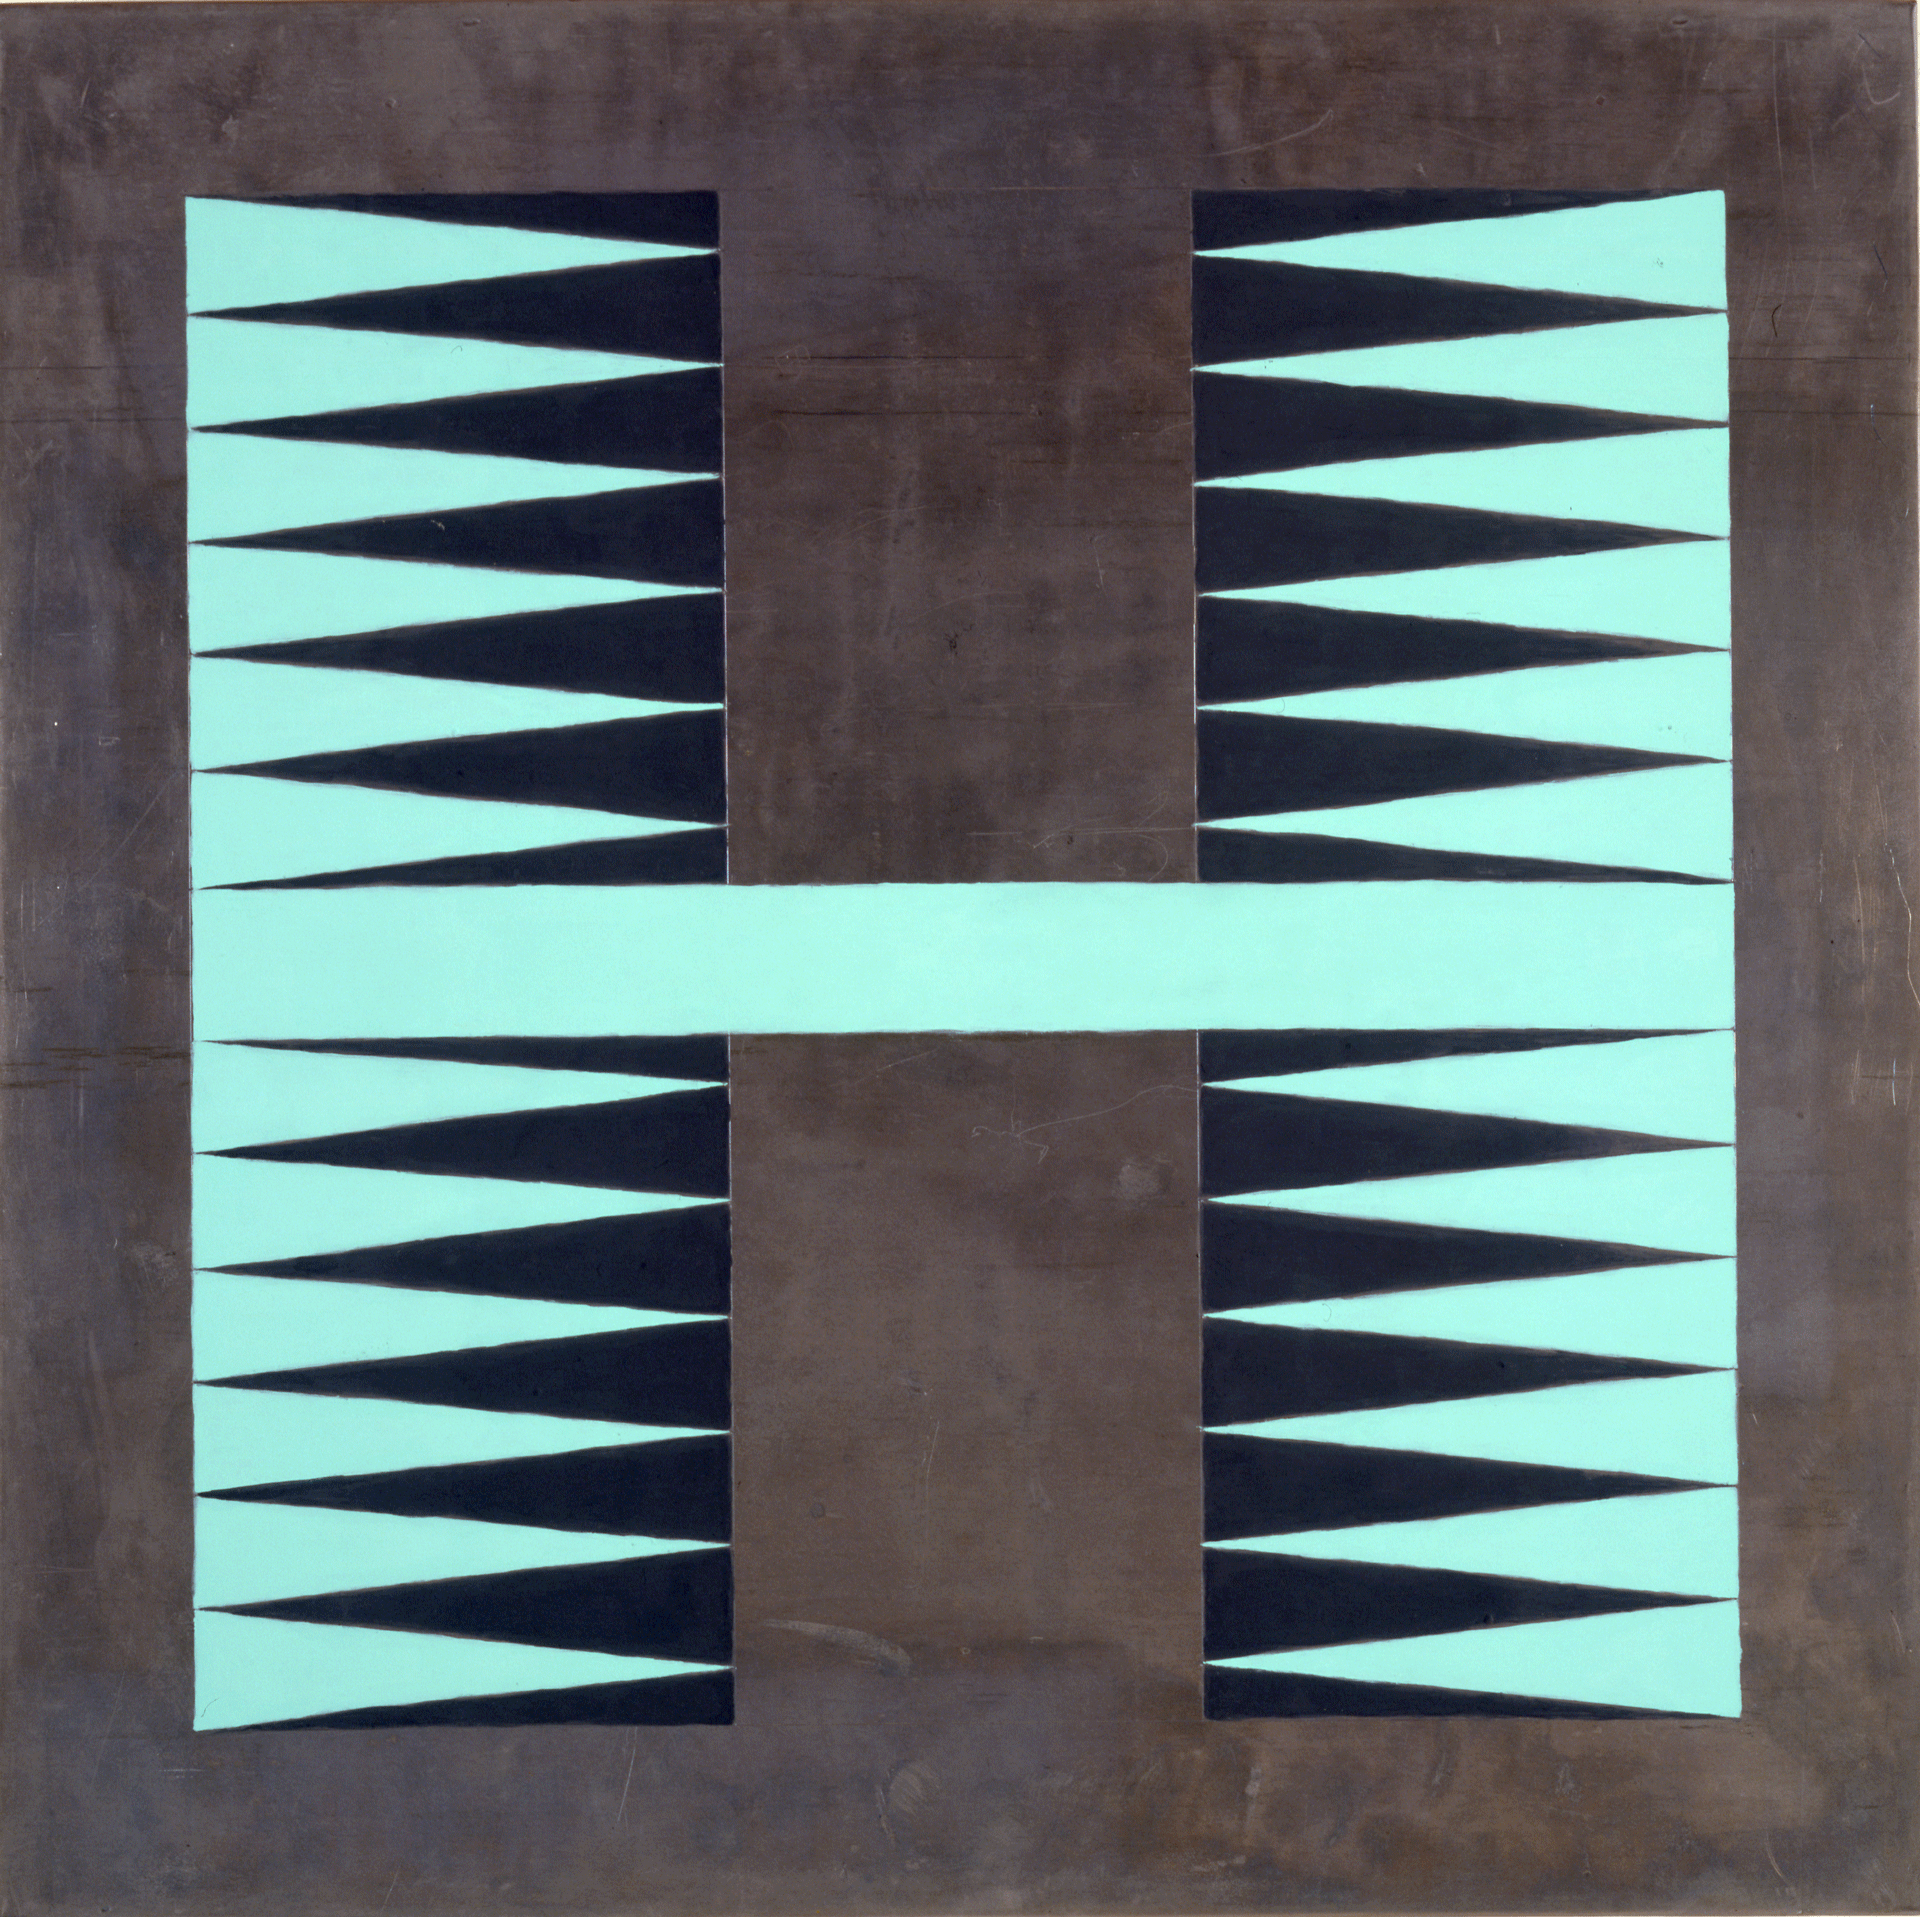 A painting by Sherrie Levine, titled, Lead Chevron: 1, dated 1987. 